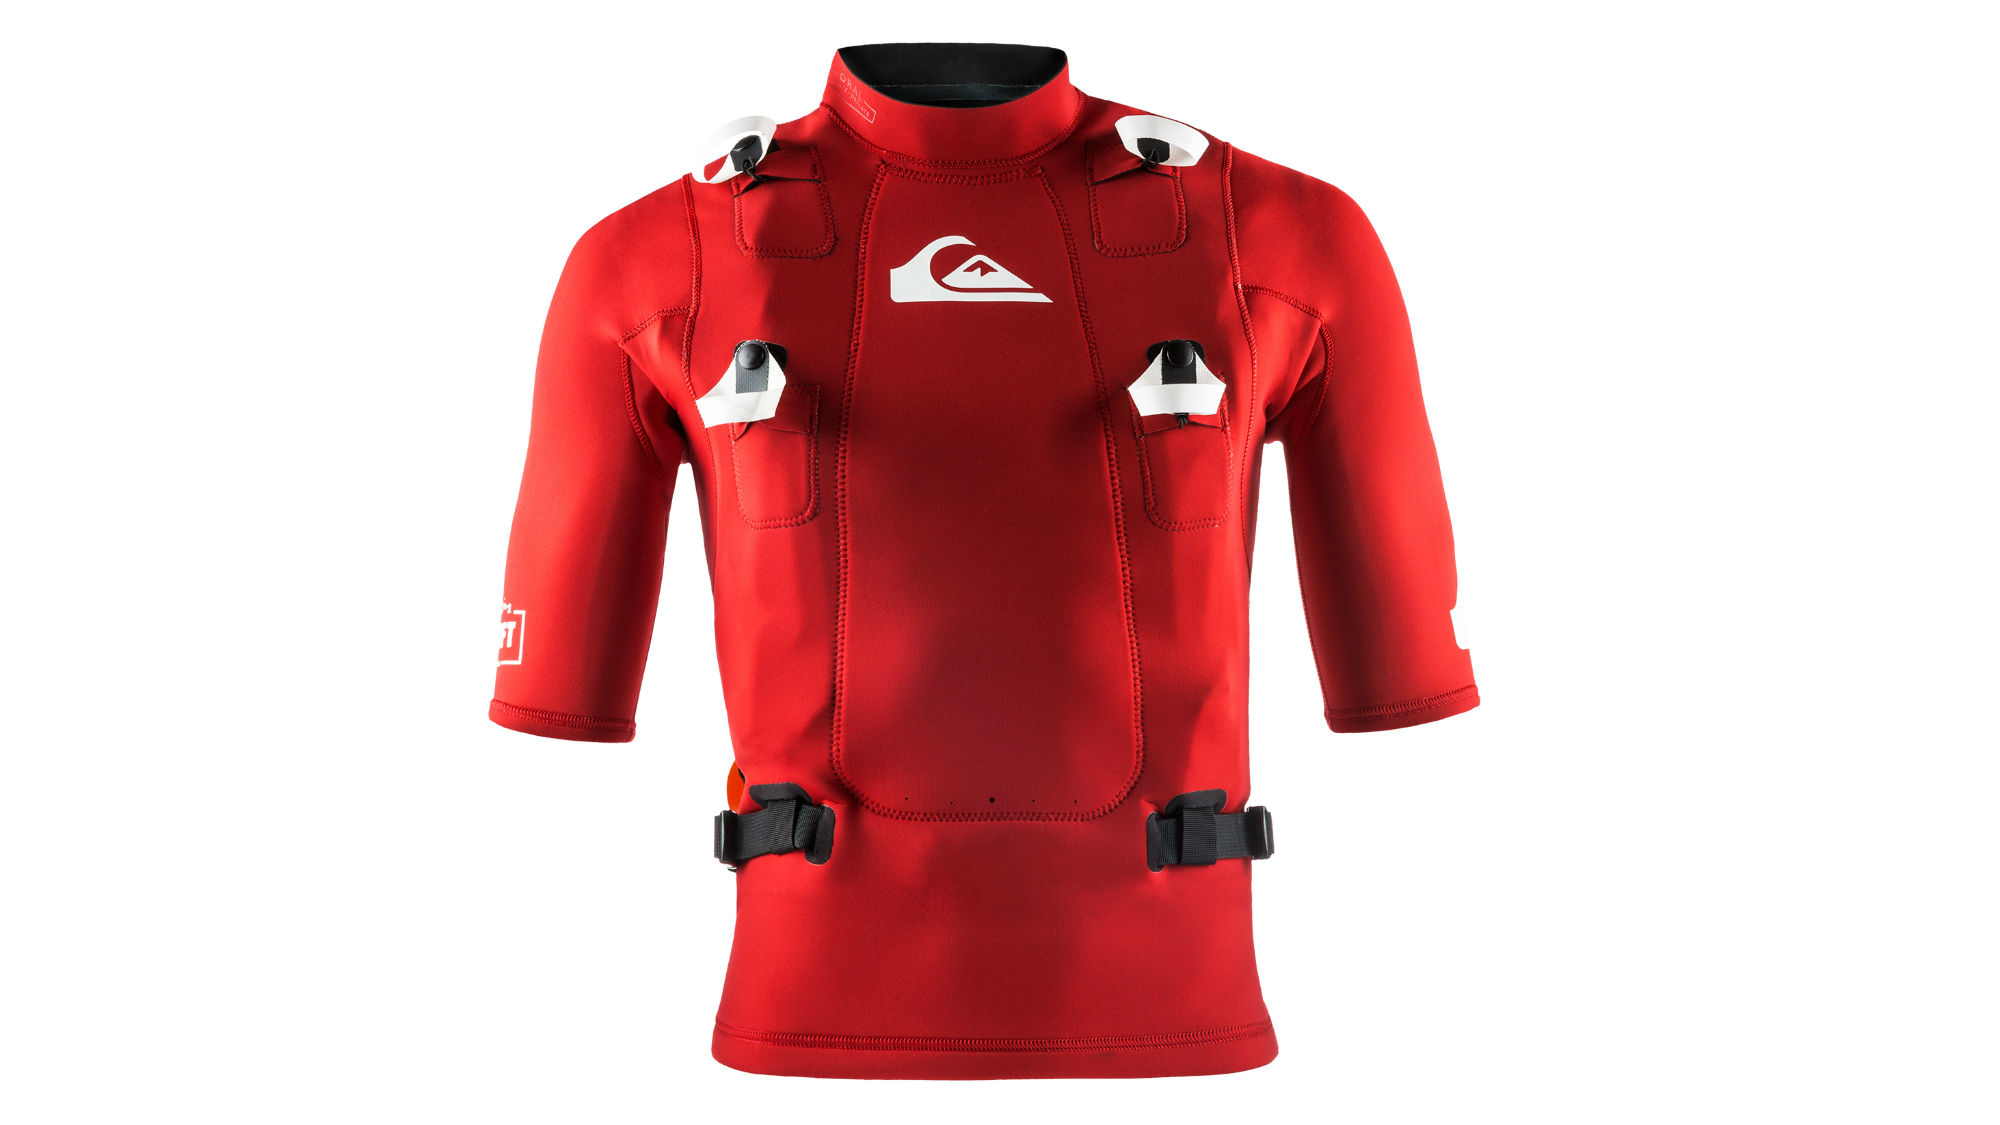 Big-Wave Manual Make Will Surfing a The New Vest Little - Quiksilver\'s Airlift Safer